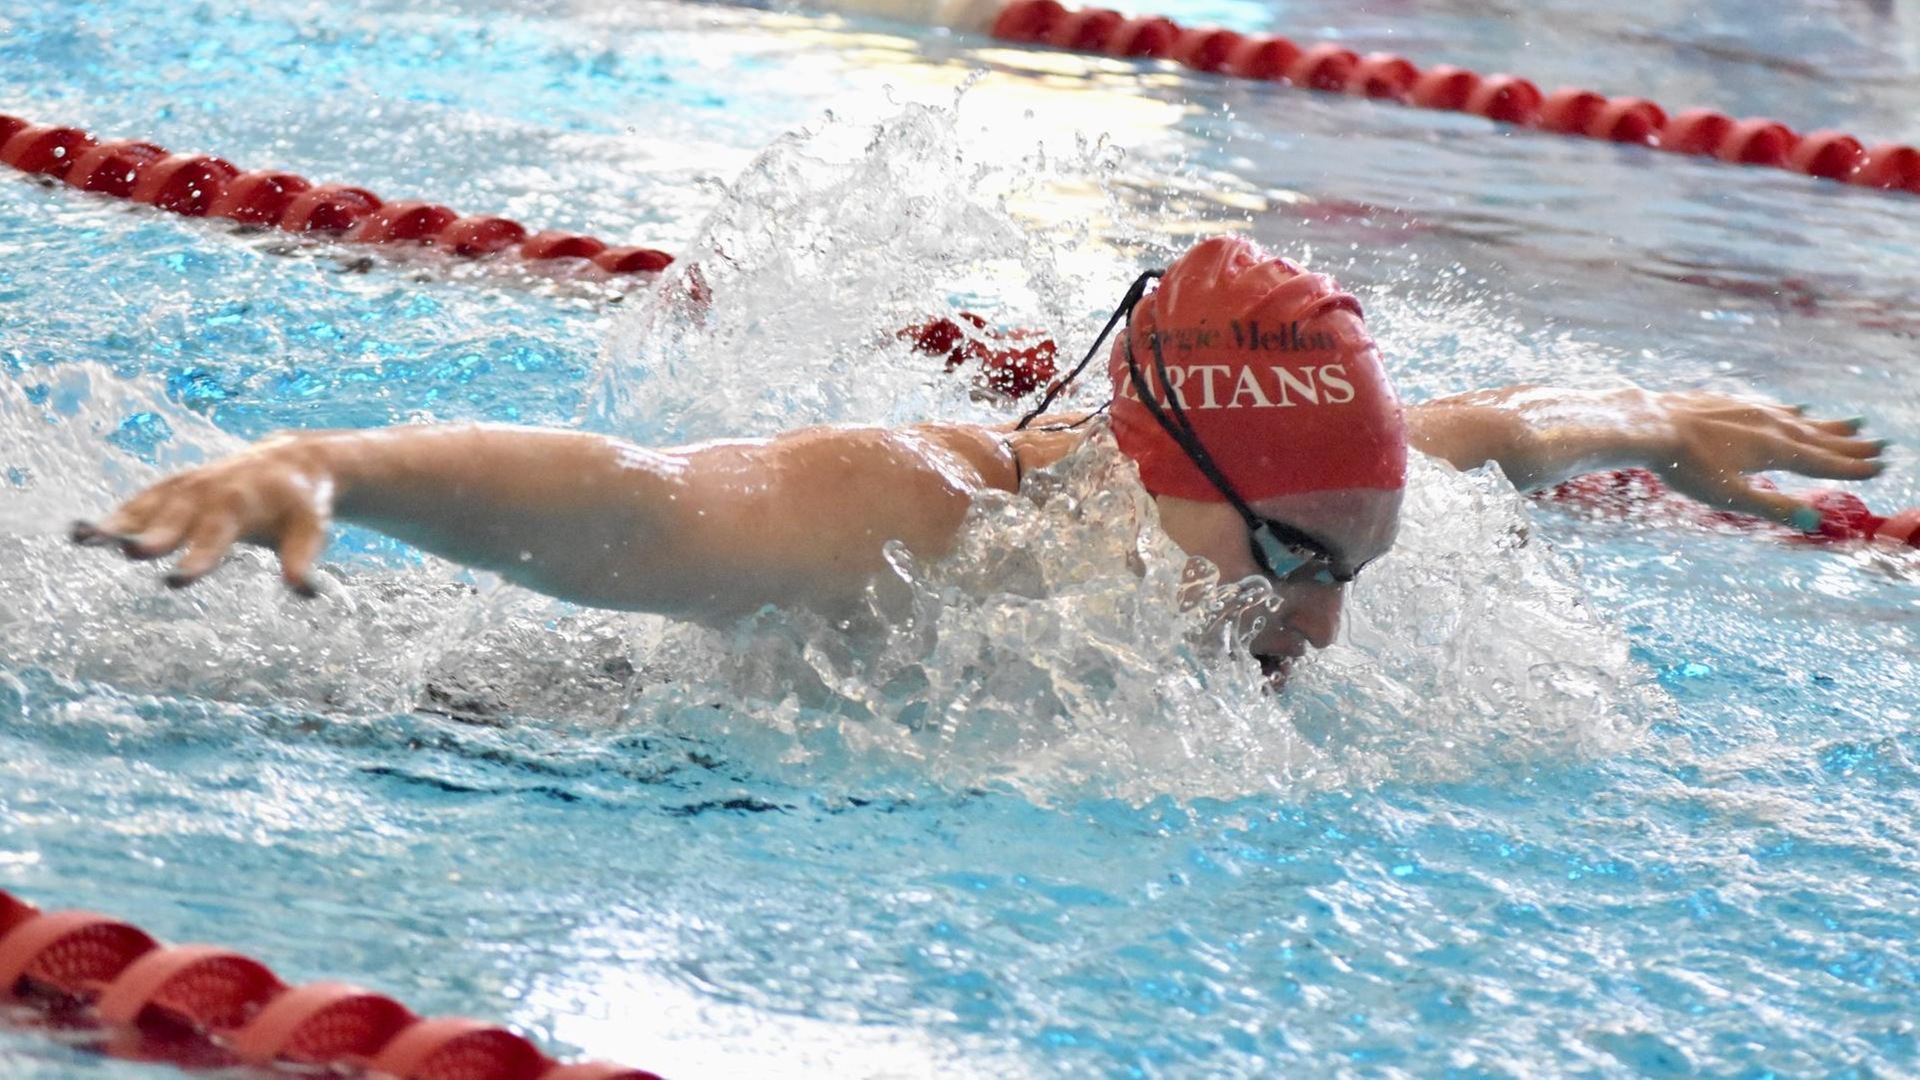 women's swimmer in red cap with arms stretched out doing butterfly stroke